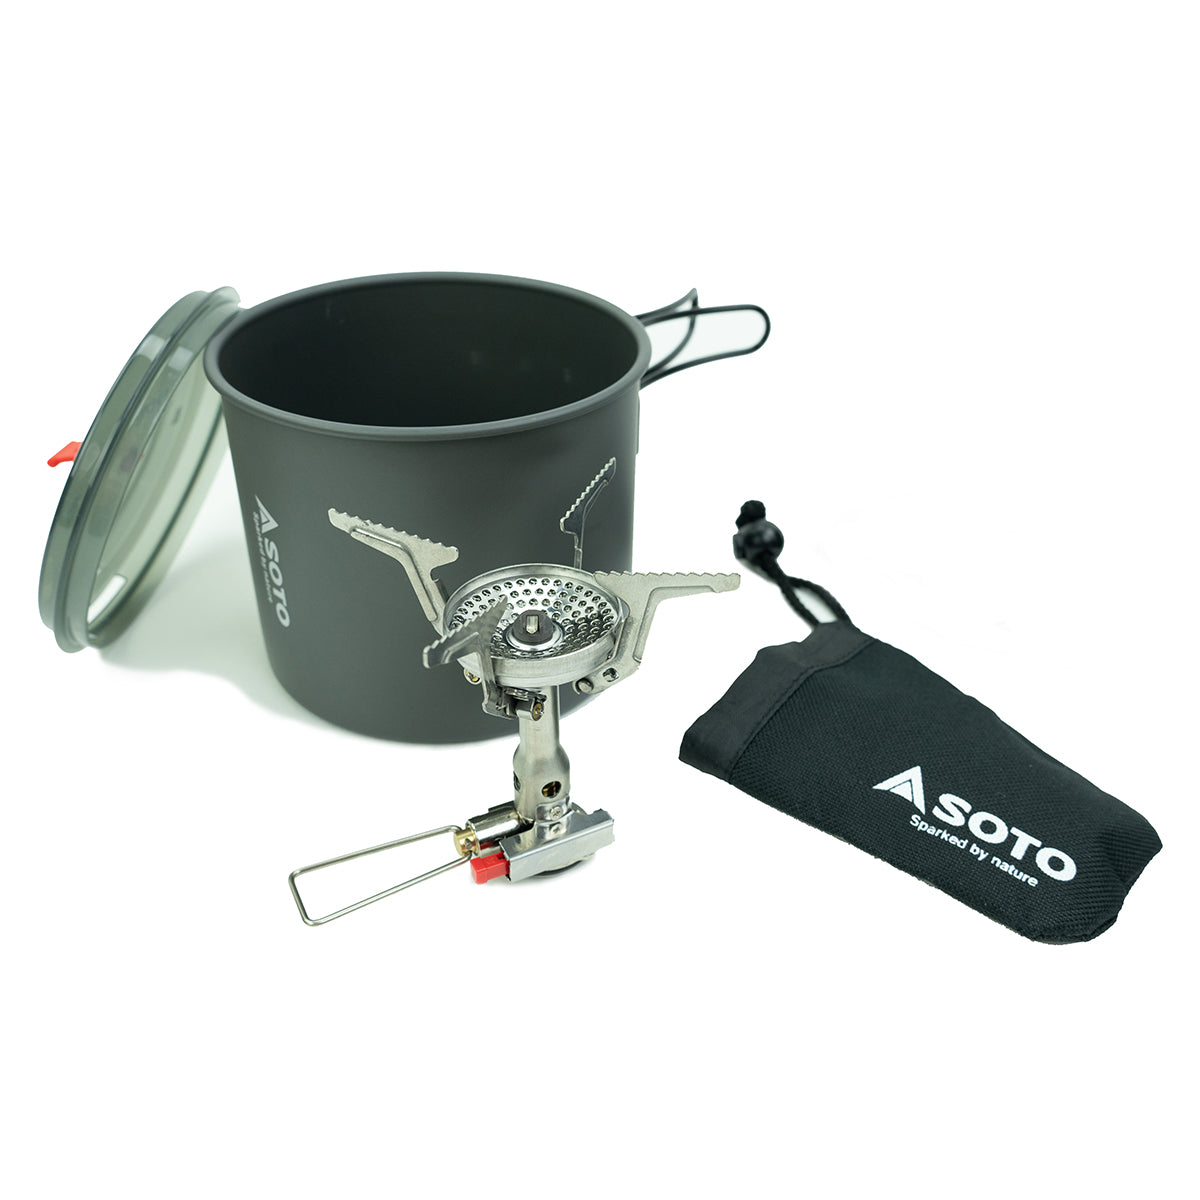 Soto New River Pot + Amicus Stove System by Soto | Camping - goHUNT Shop